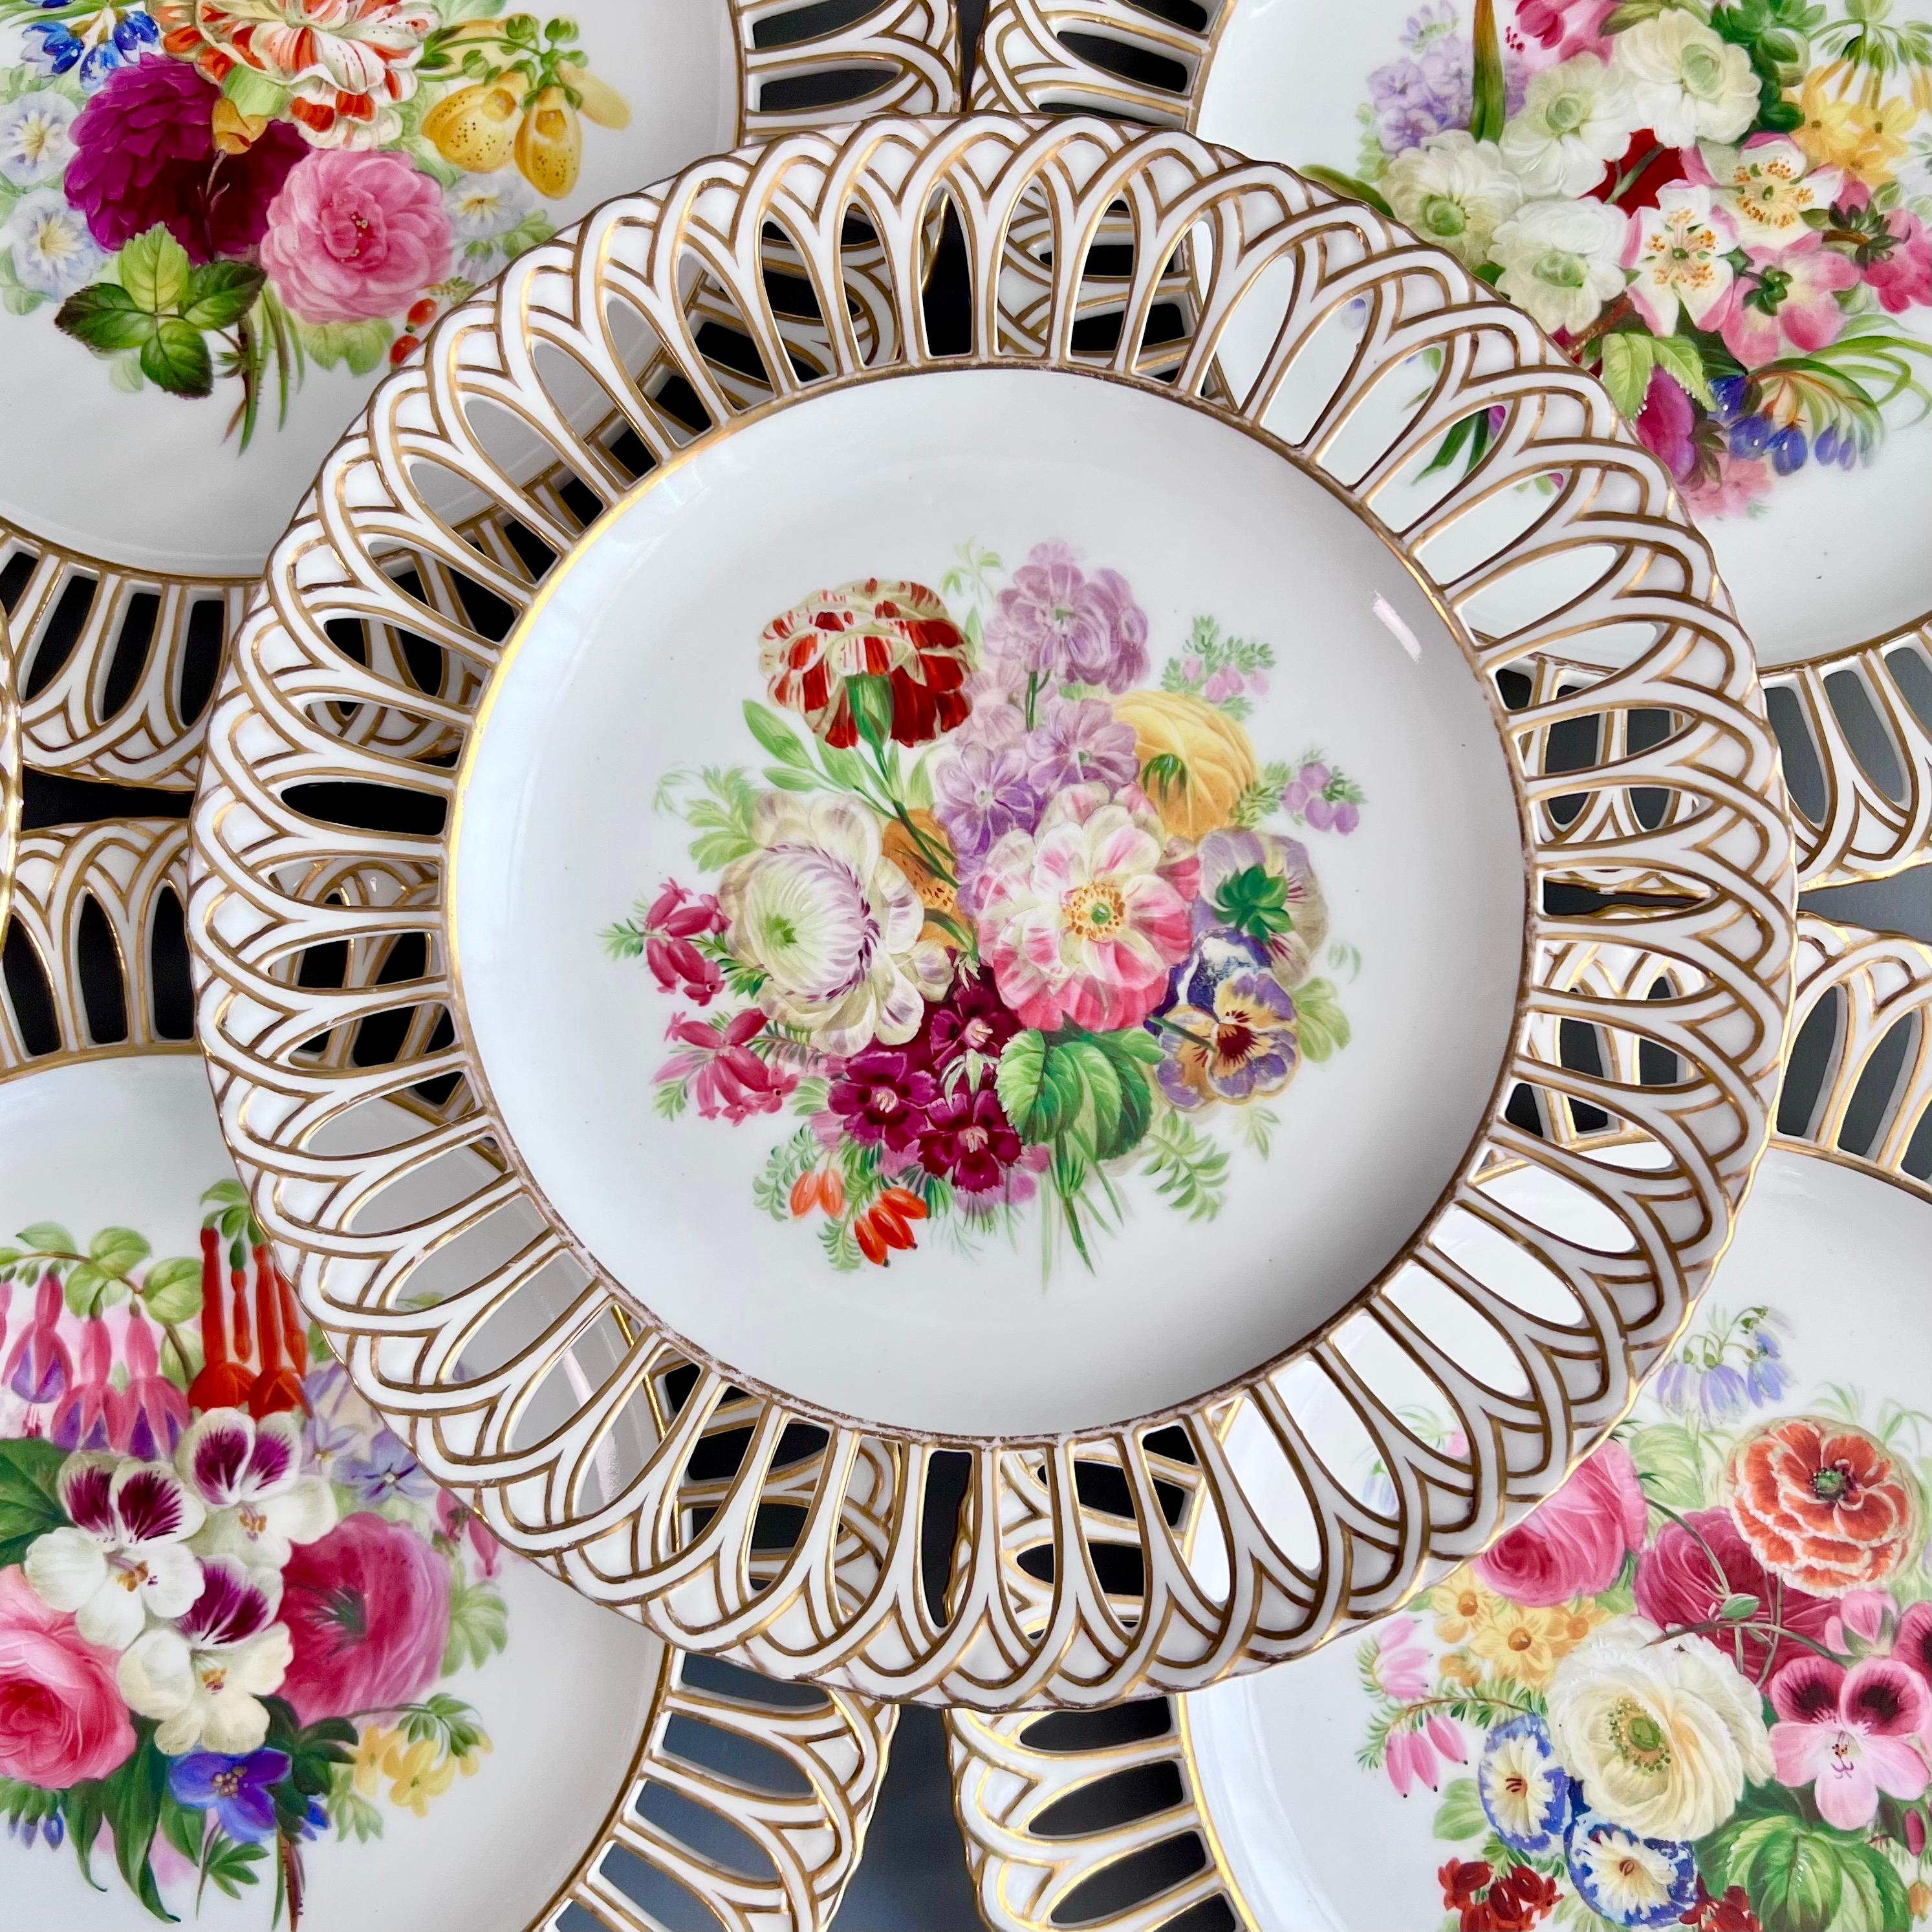 This is a stunning set of 8 reticulated plates made by Copeland in 1848. Each plate is decorated with a unique sublimely painted flower arrangement by the artist Greatbatch. 

We have a second set of 8 of these plates available, as well as a few